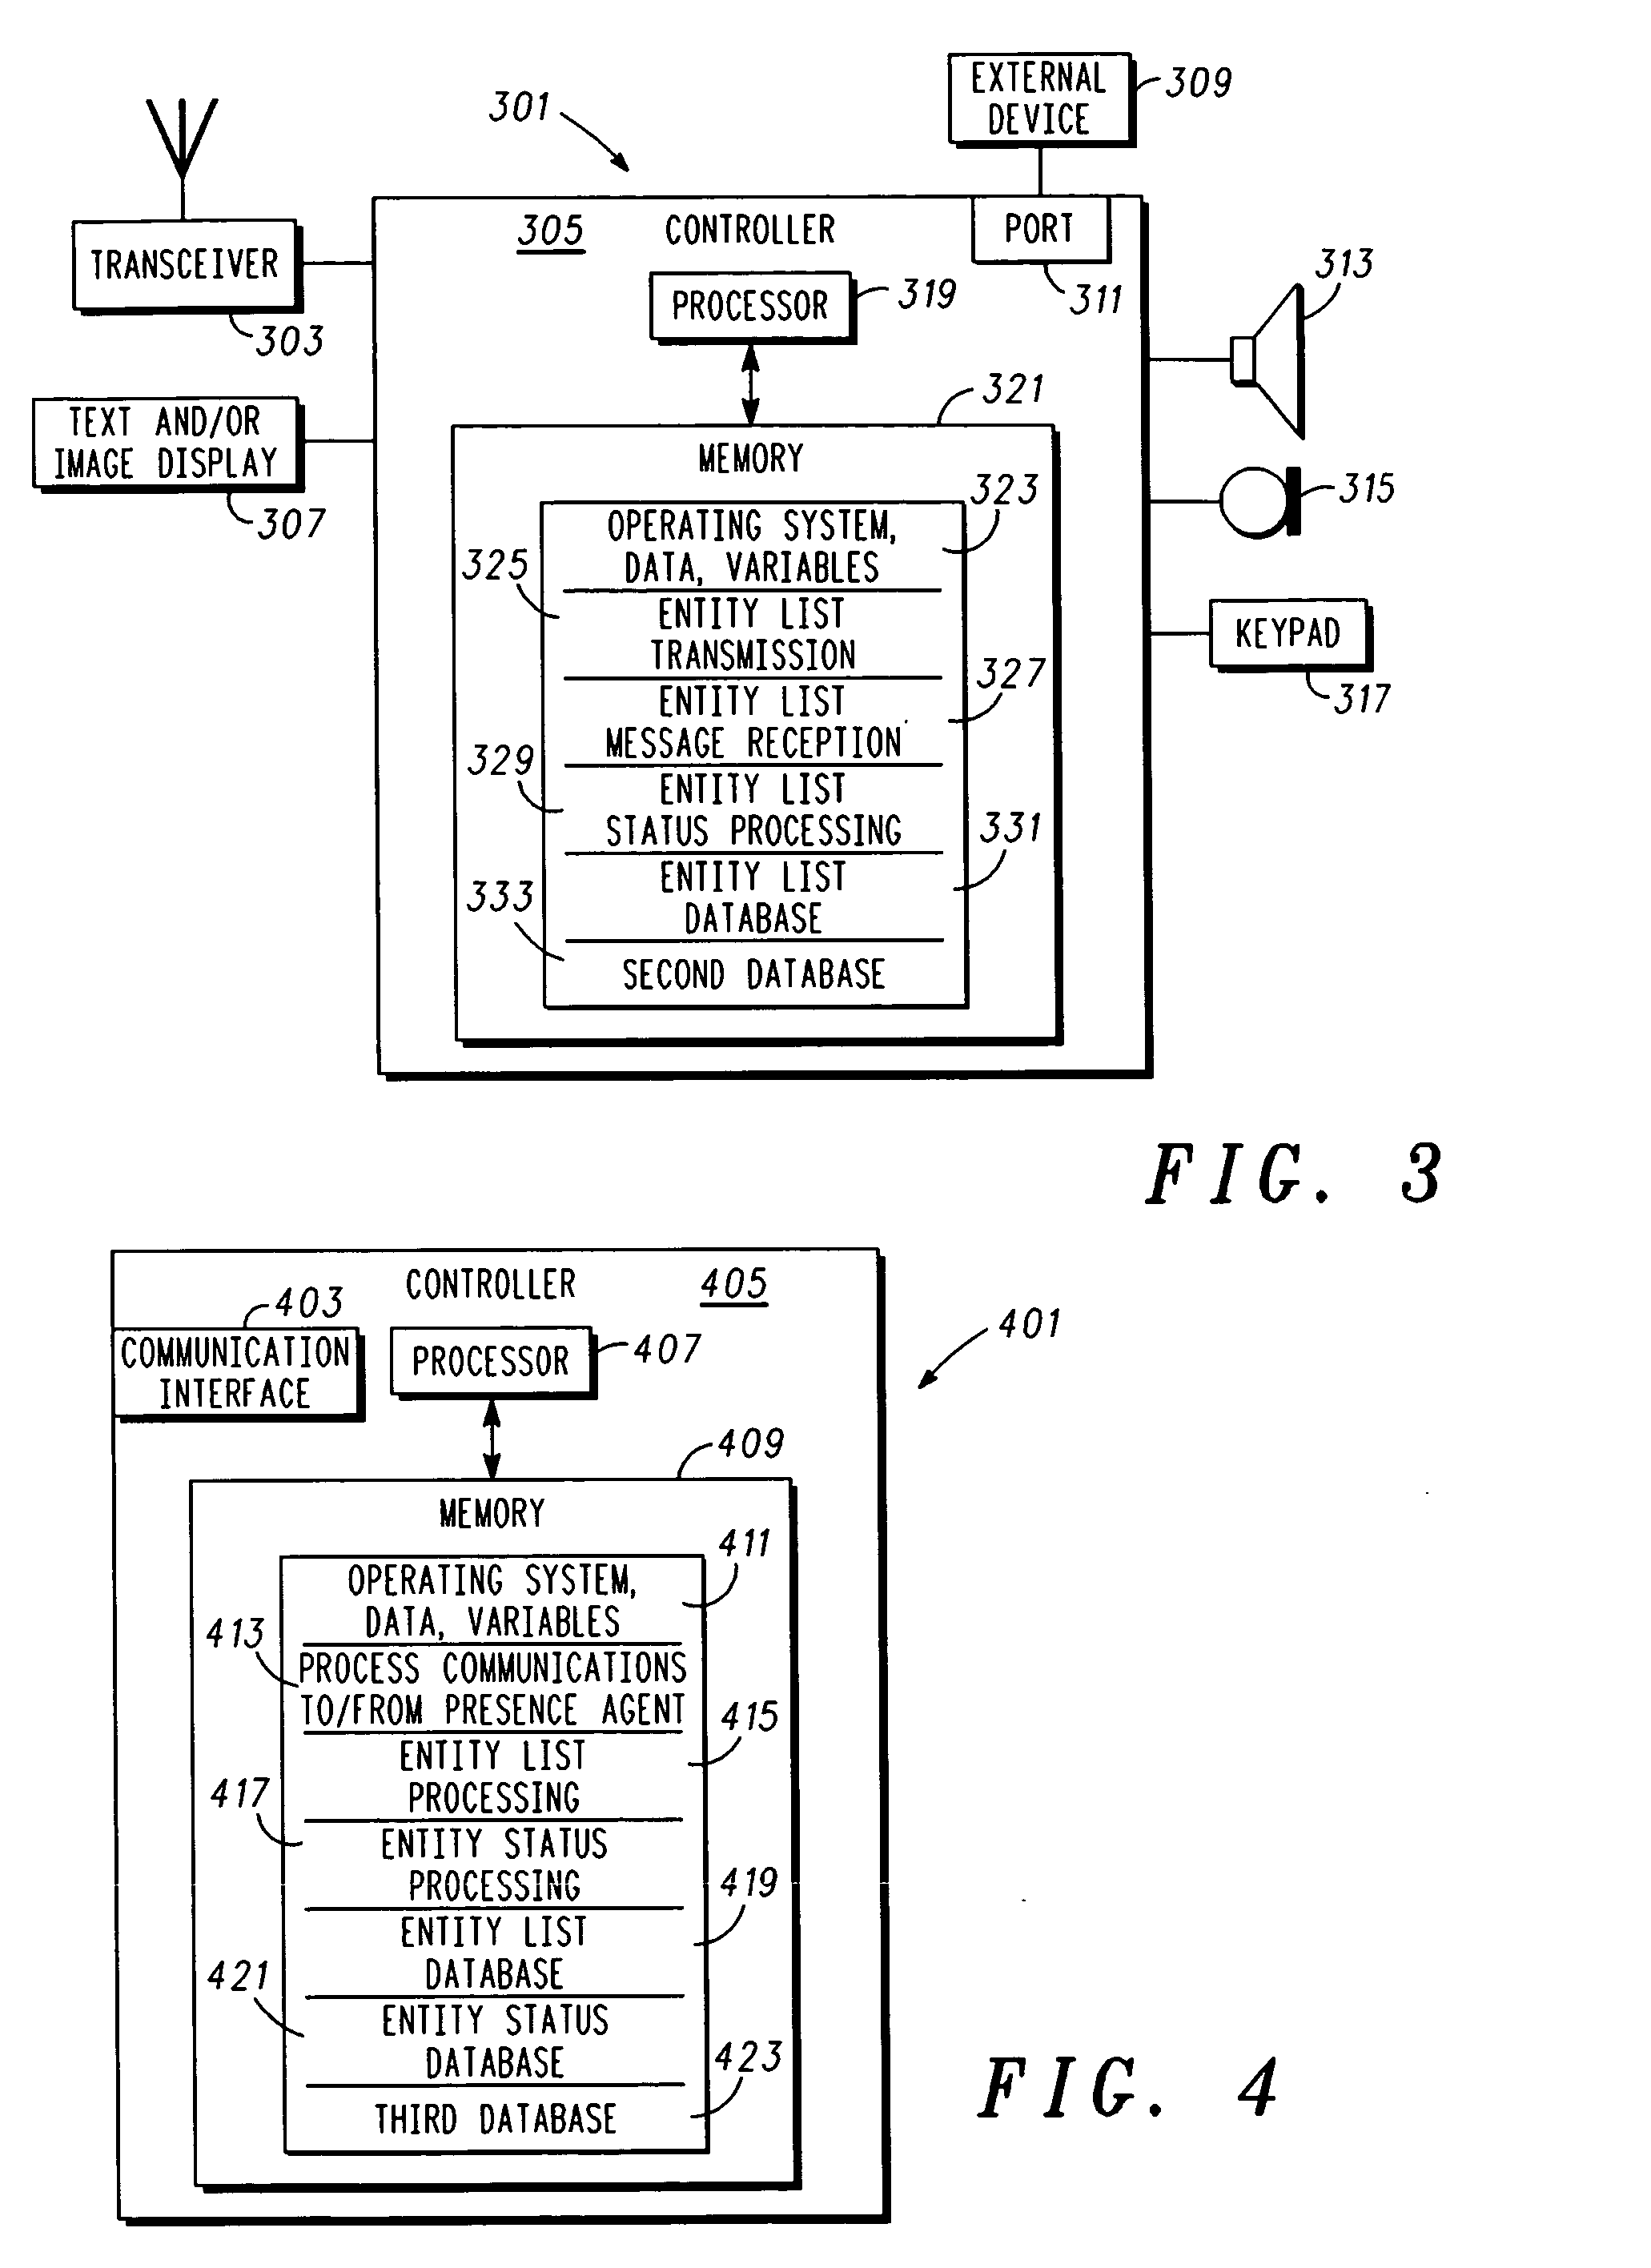 Method and system for providing entity status information in a communication network